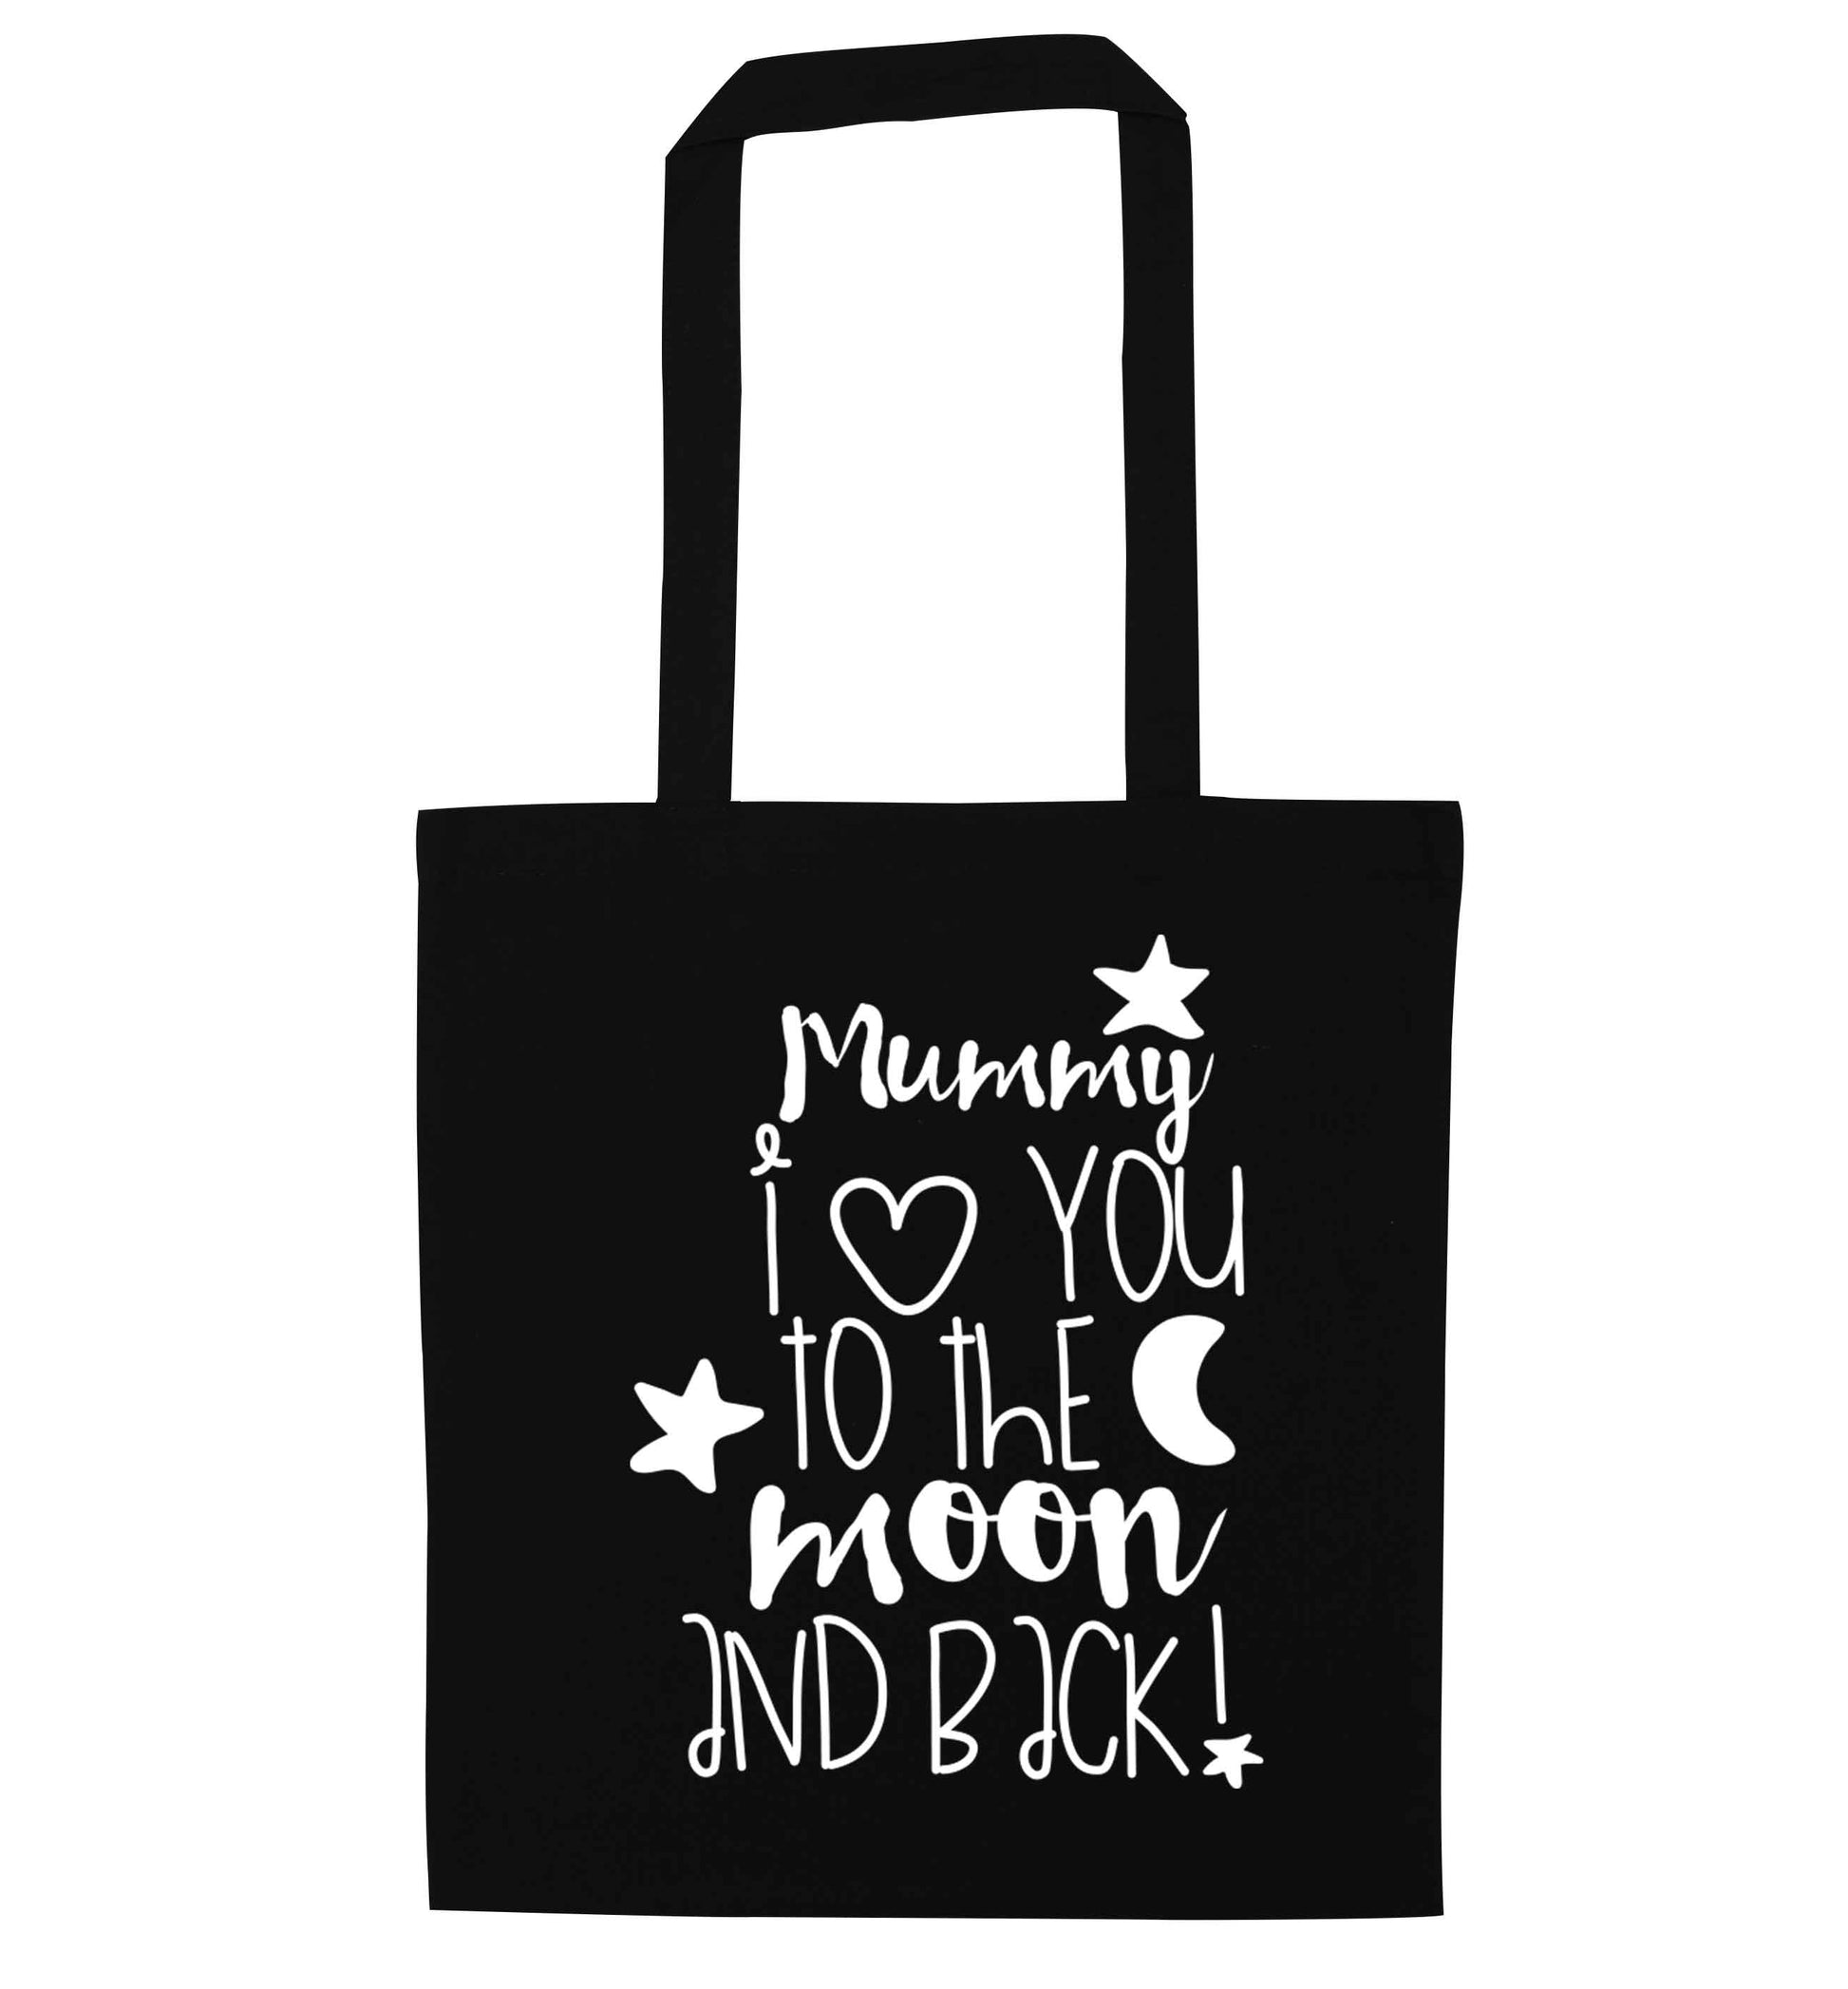 Mummy I love you to the moon and back black tote bag